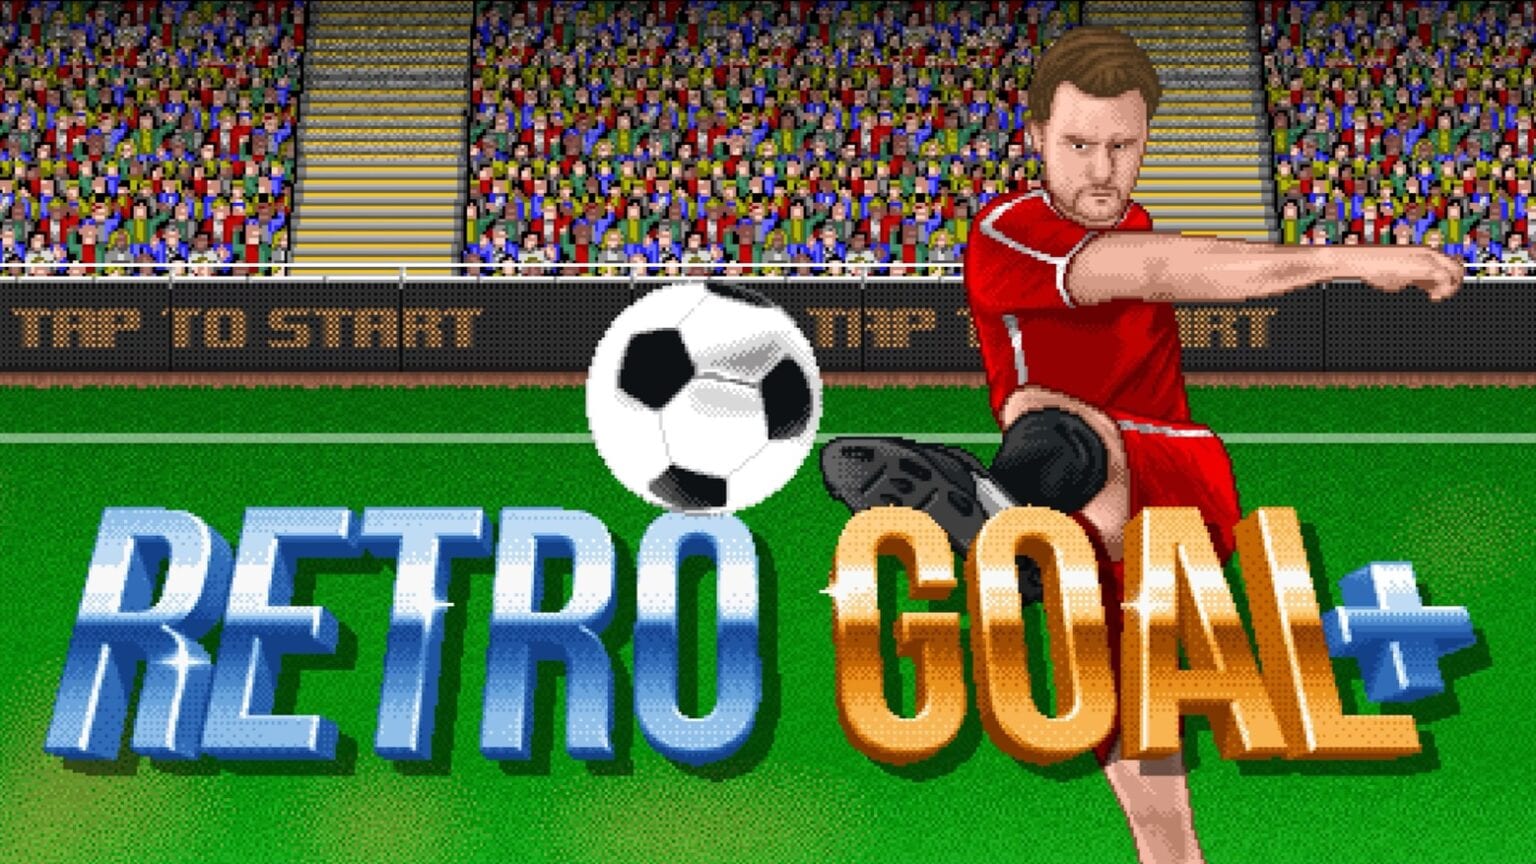 Retro Goal+ is one of three recent additions to Apple Arcade.